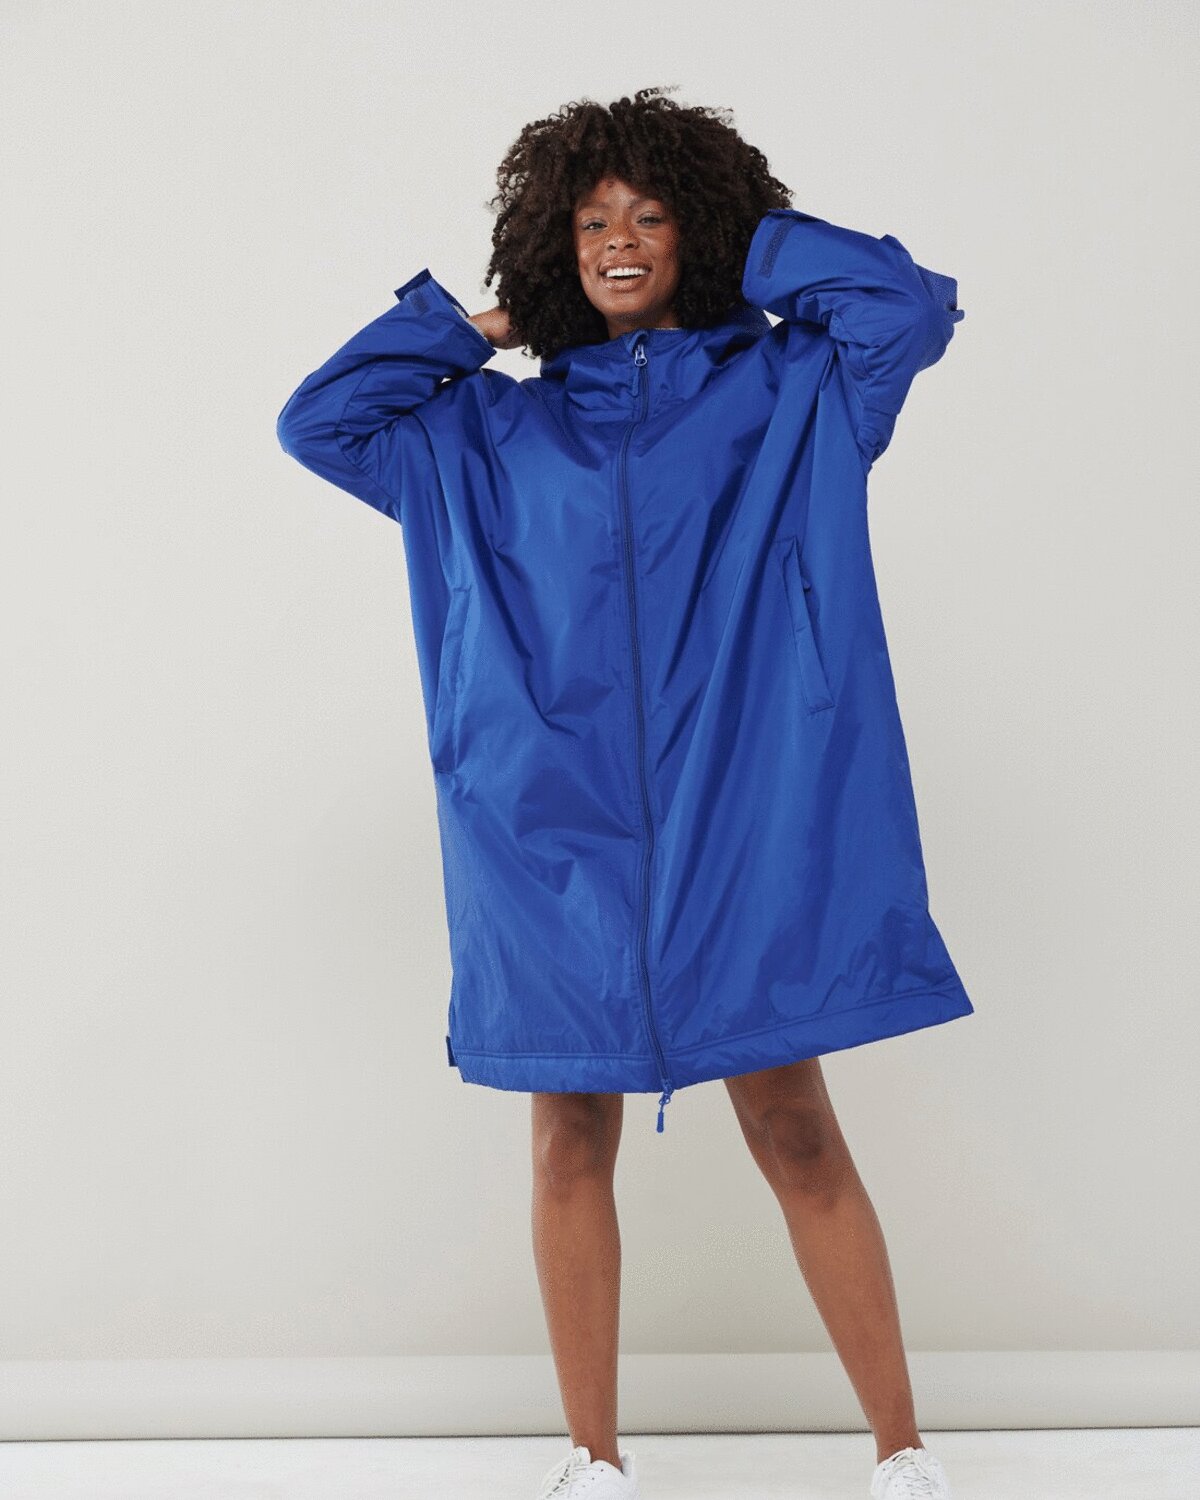 LV690M-ADULTS ALL WEATHER ROBE